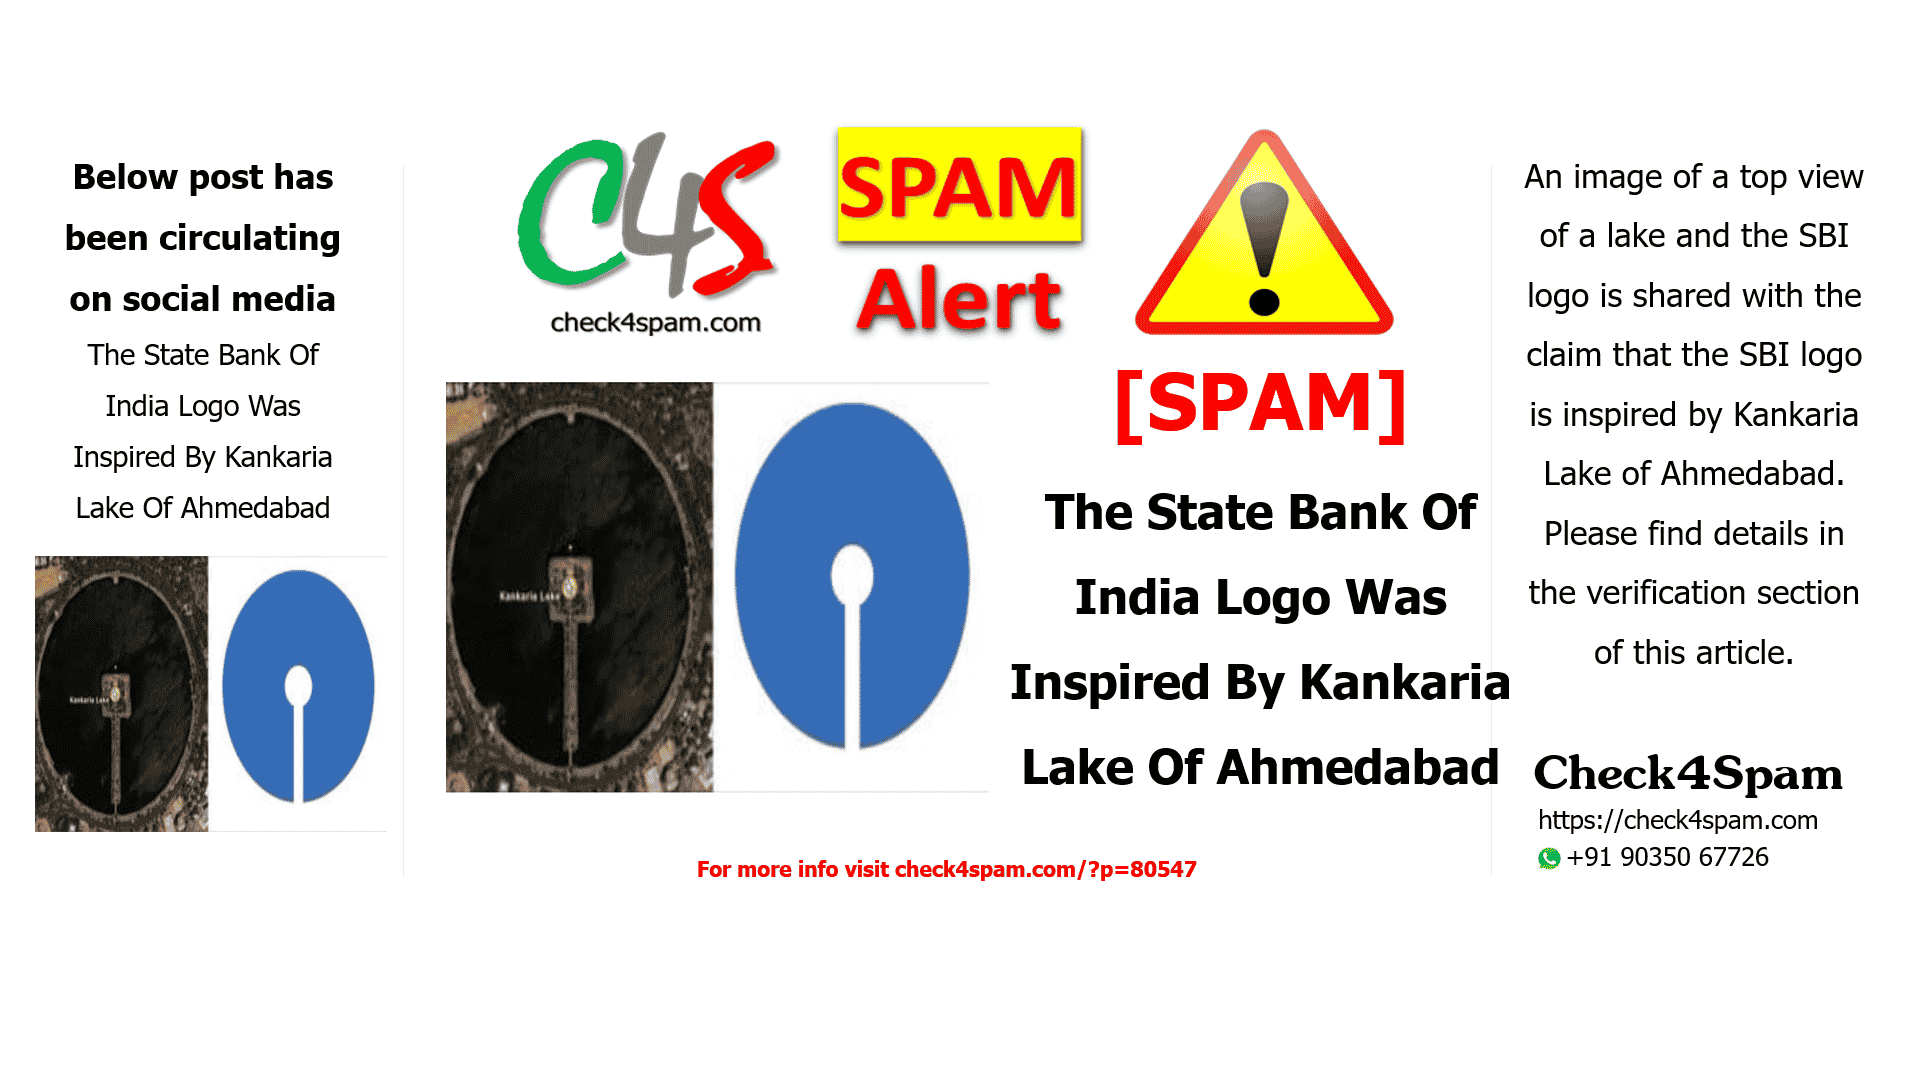 The State Bank Of India Logo Was Inspired By Kankaria Lake Of Ahmedabad